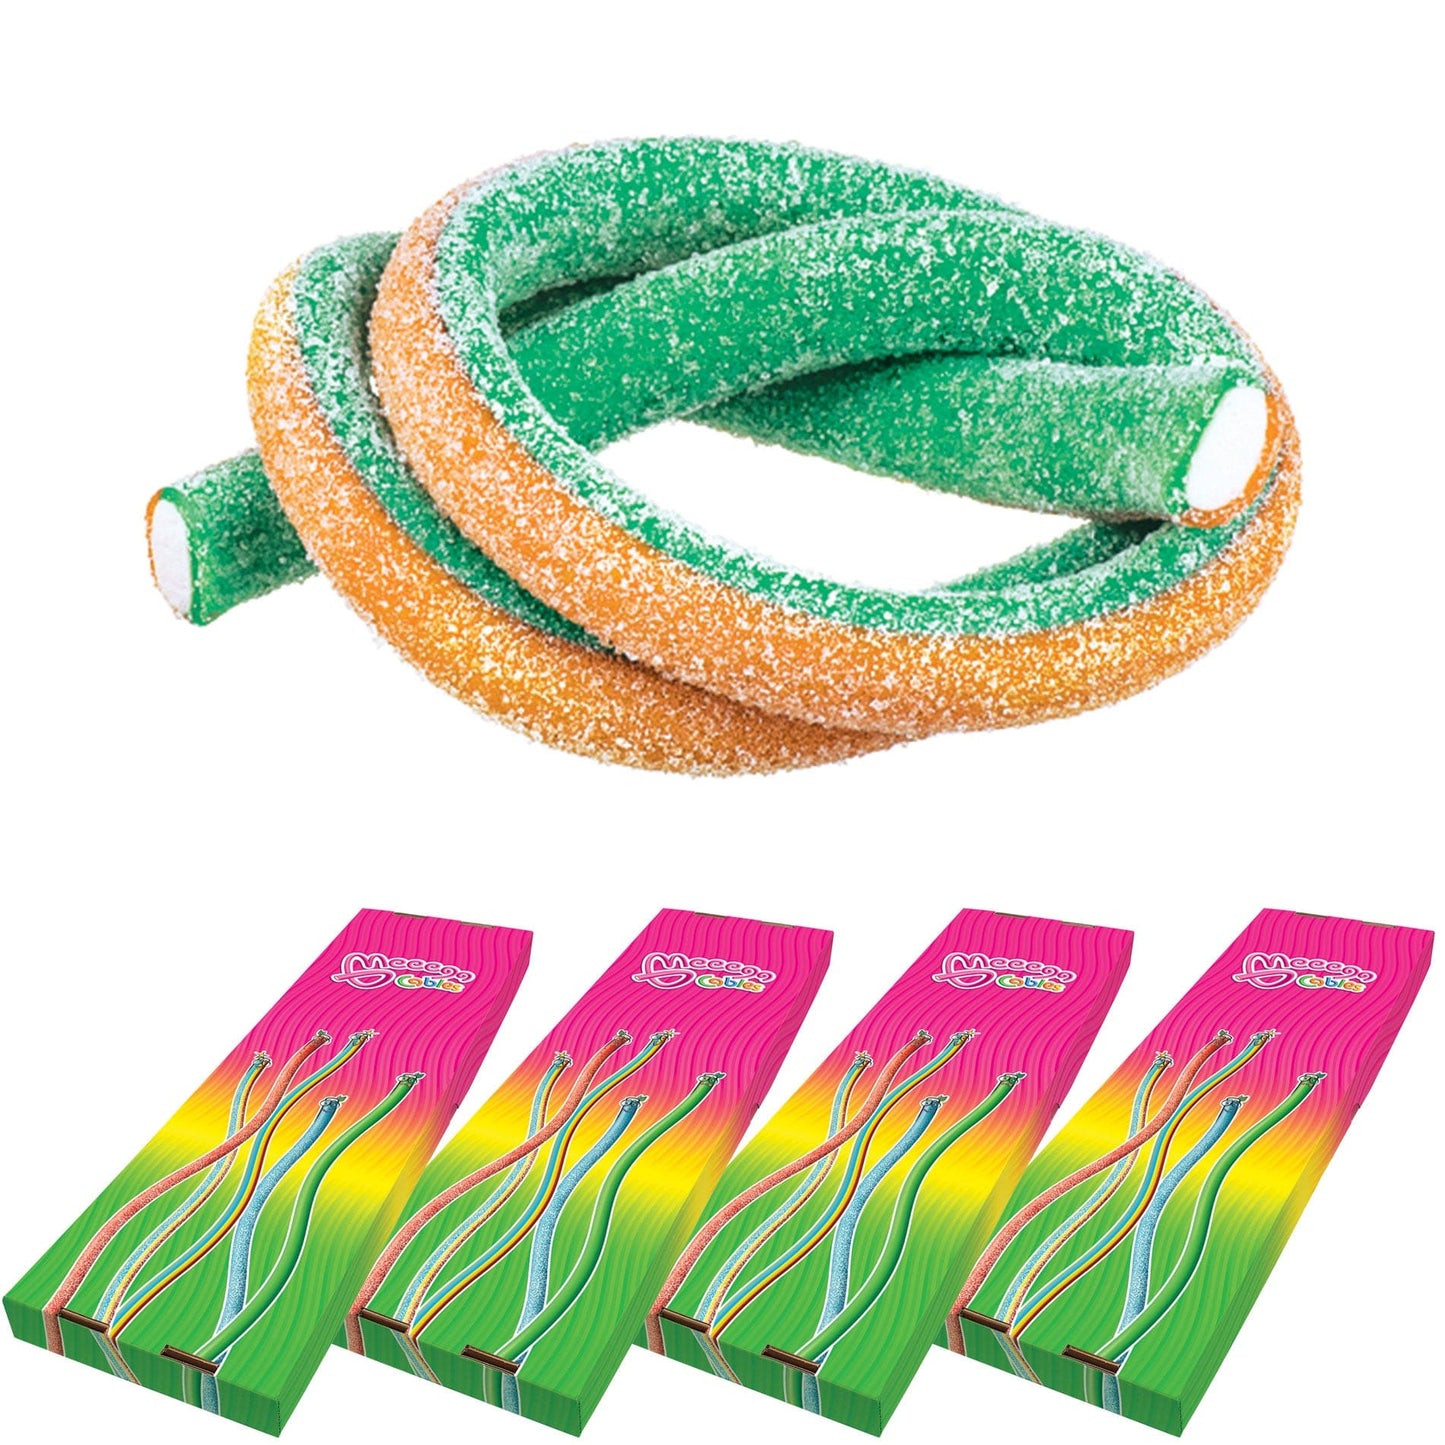 Novelty Concessions Gummy Rope SOUR ORANGE LIME / 4 Pack (120 pieces) Meeega Cables European Chewy Rope Candy - Box of 30 individually wrapped Meeega Cables, each over 2-feet long cups with lids and straws